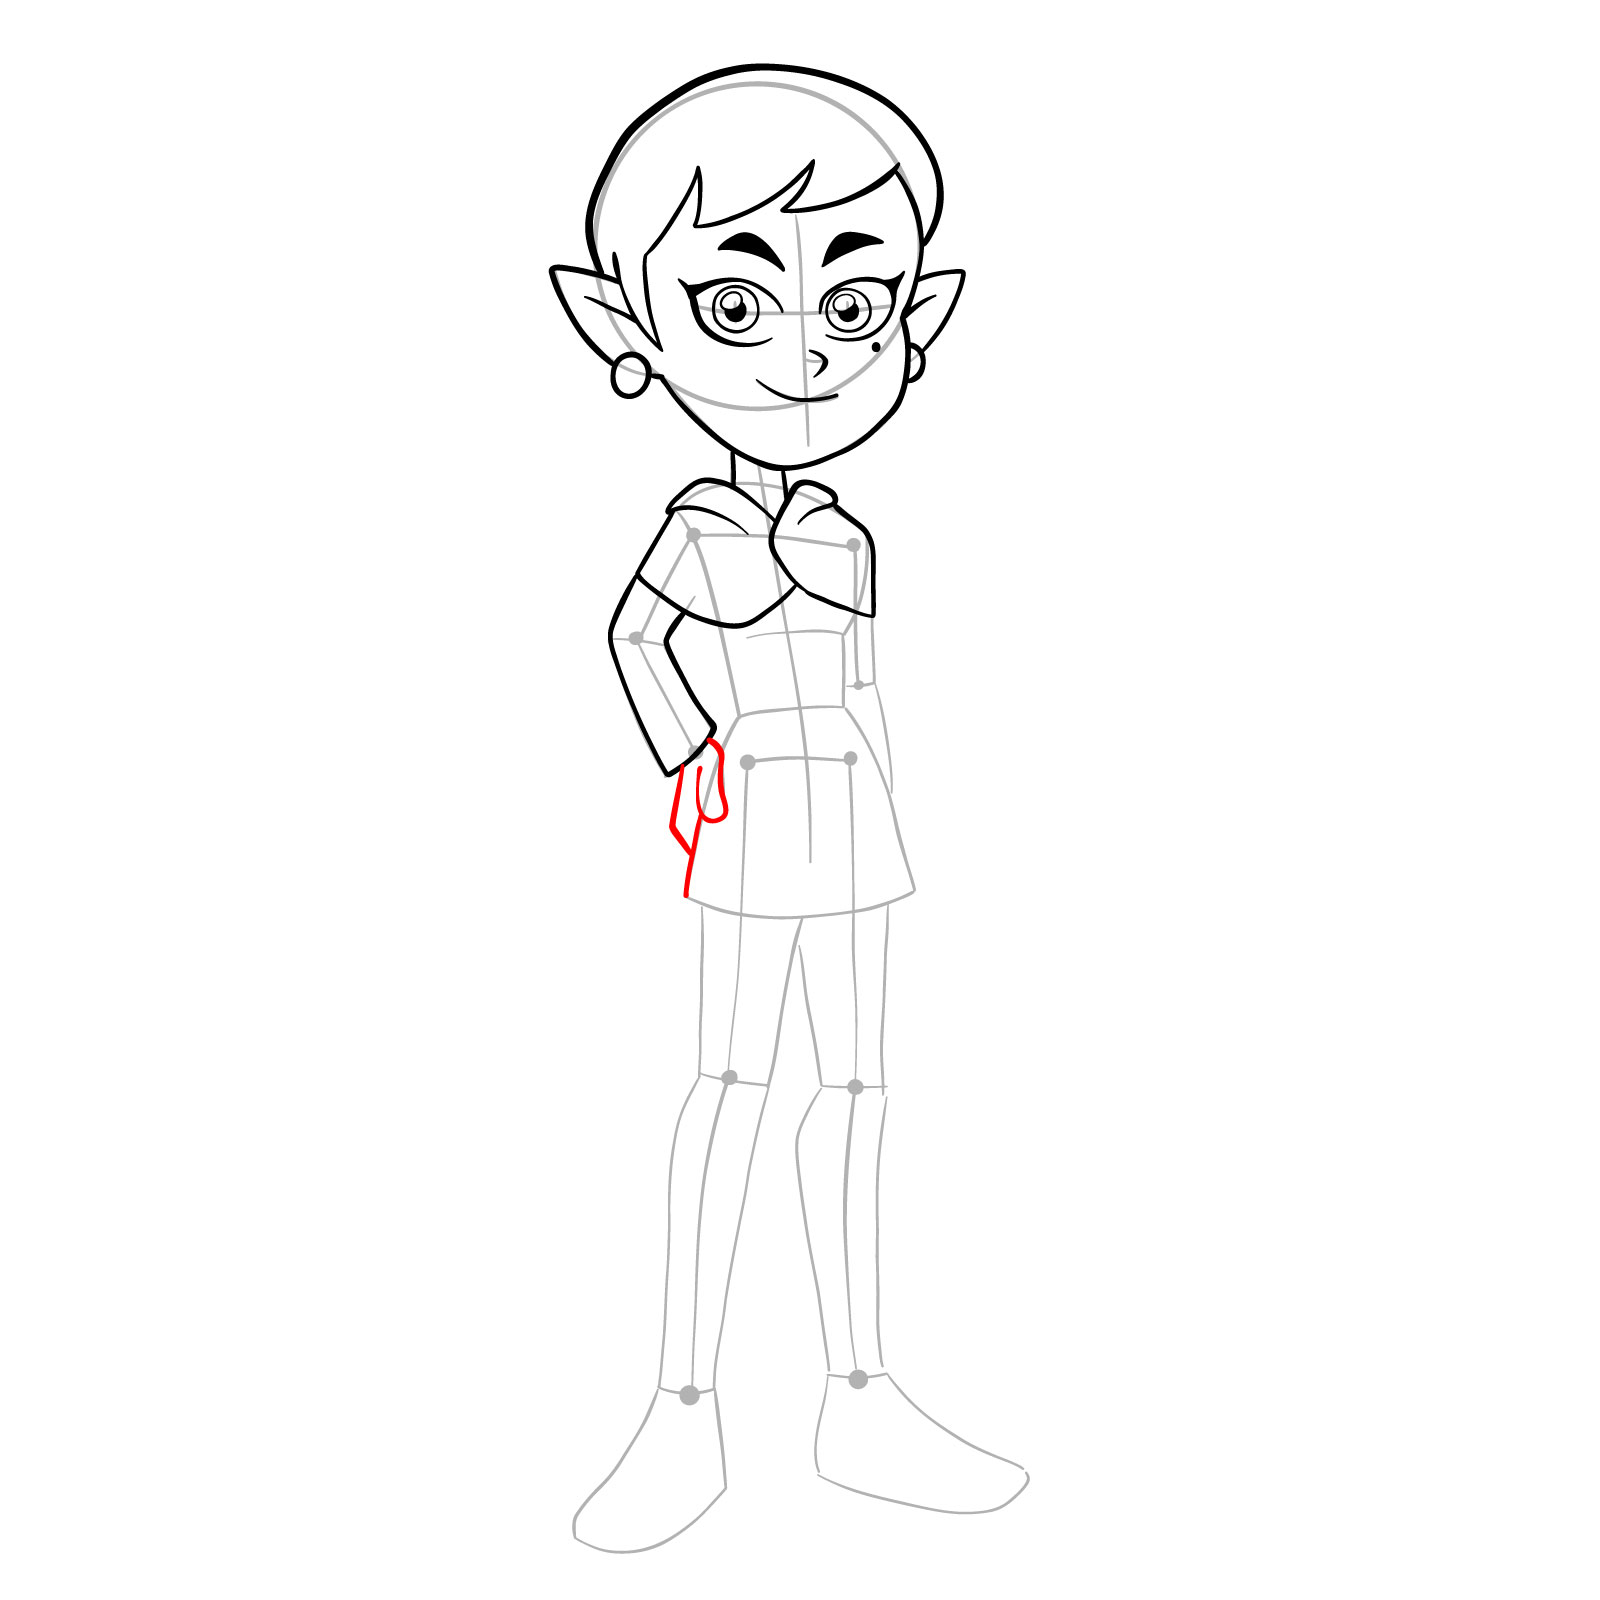 How to draw Emira Blight from The Owl House - step 16